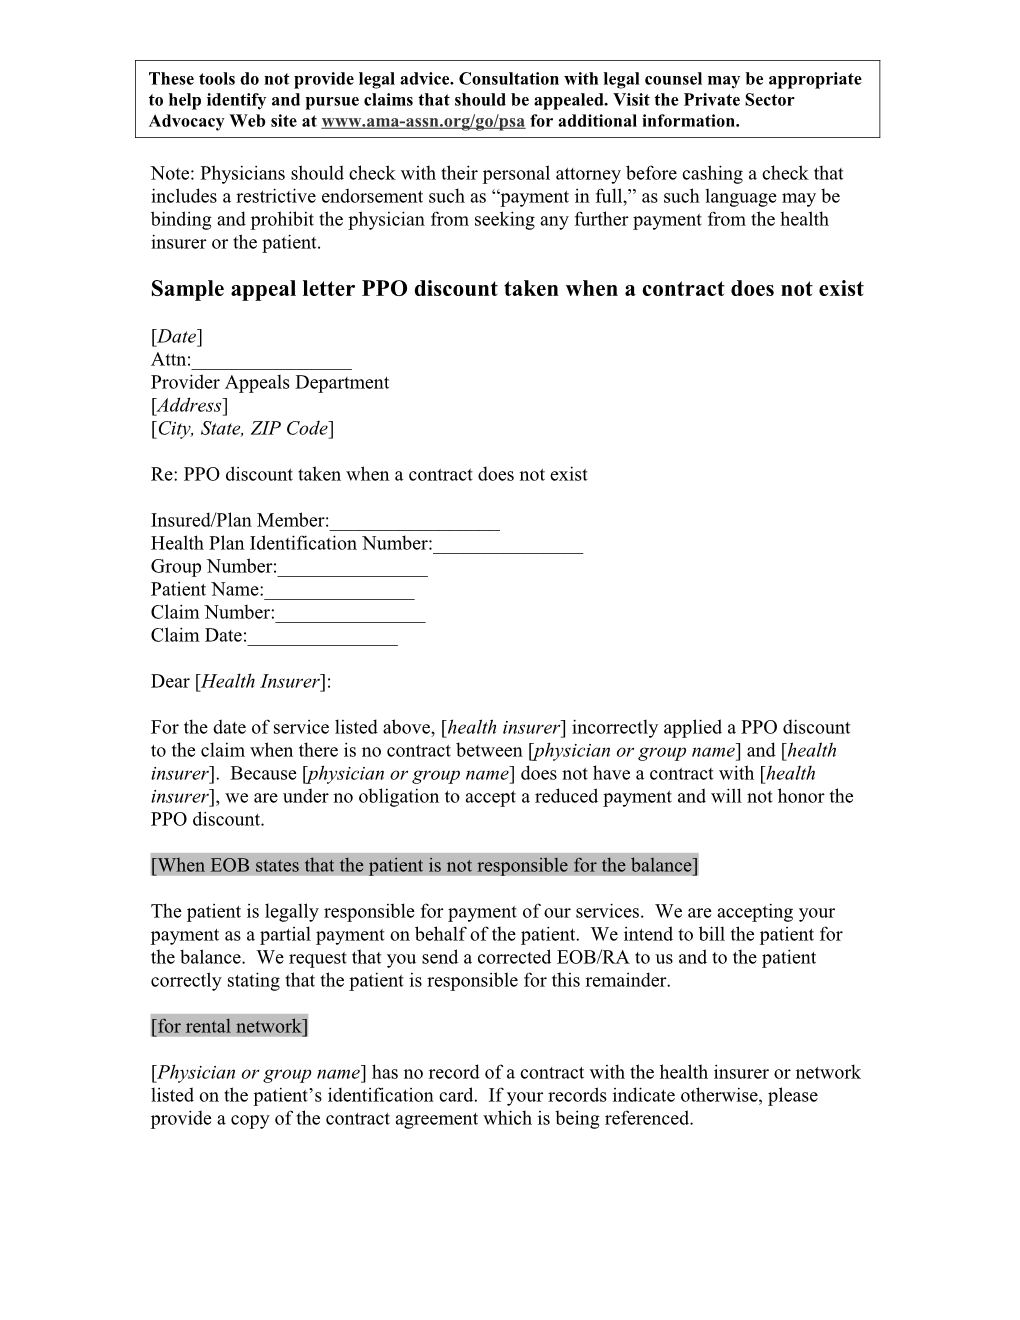 Sample Appeal Letter PPO Discount Taken When a Contract Does Not Exist